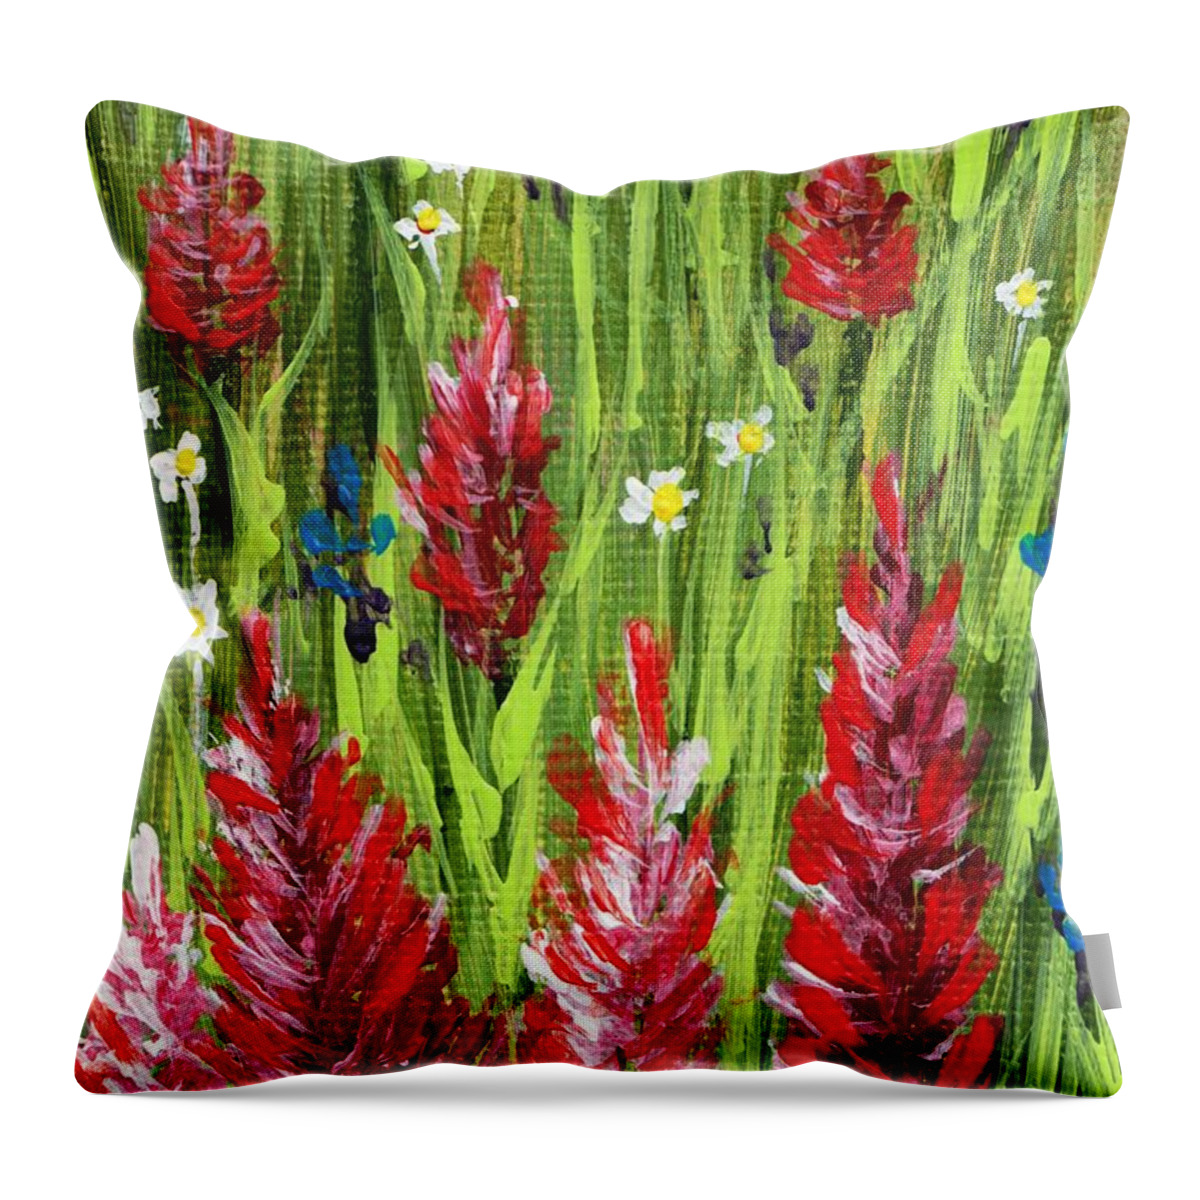 Grass Throw Pillow featuring the painting Reaching Up by Anastasiya Malakhova